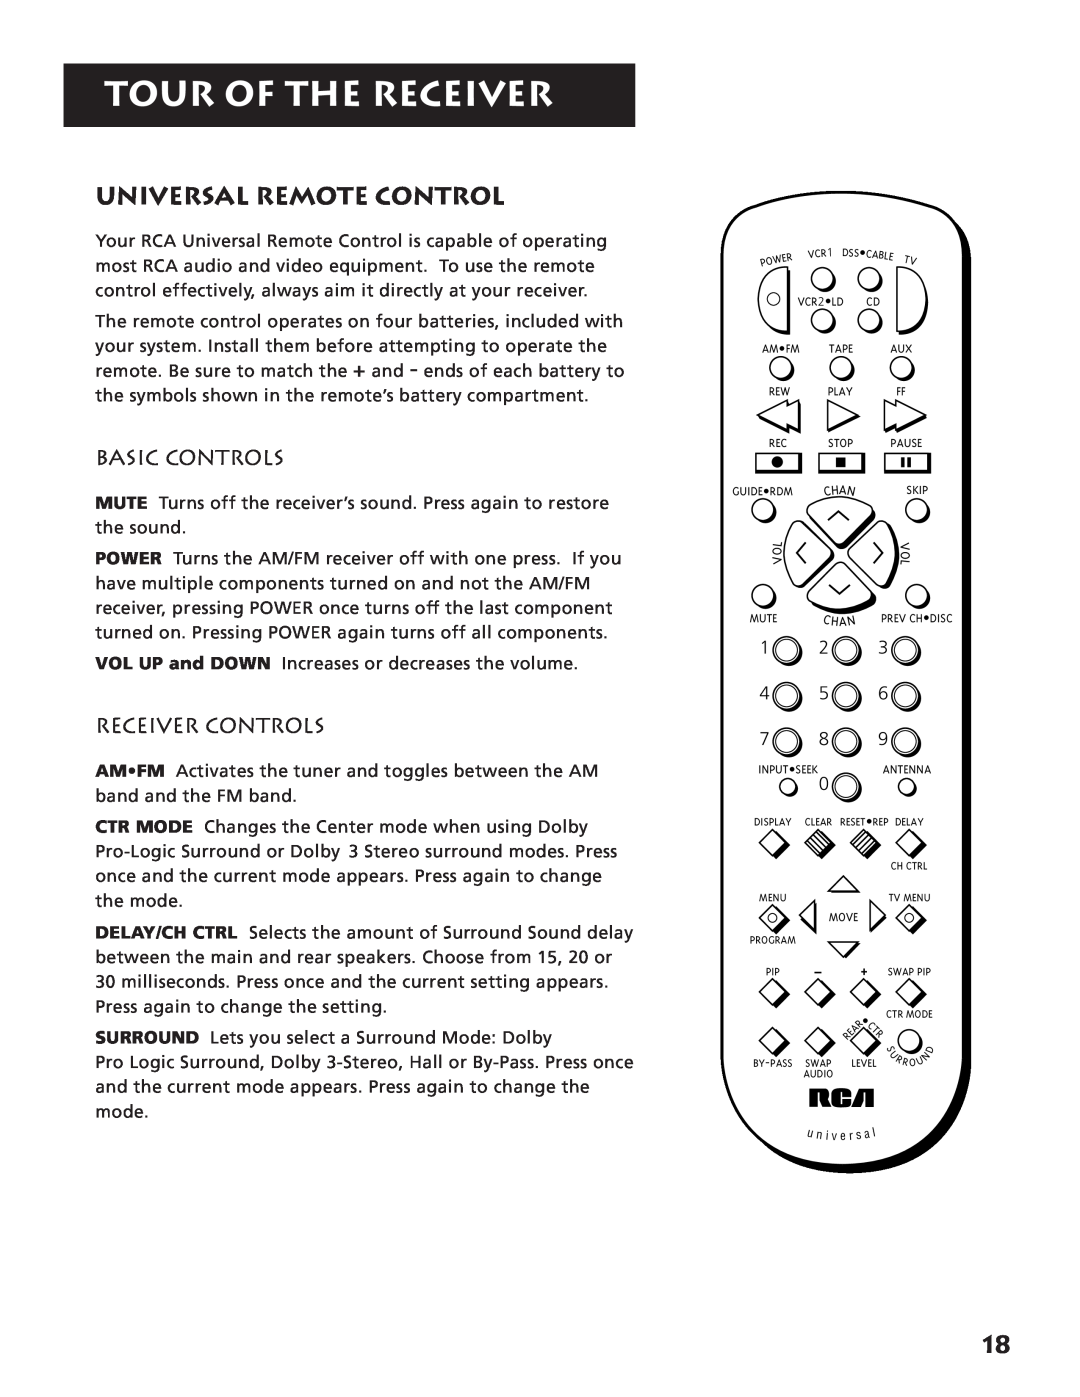 RCA RV3693 manual Universal Remote Control, Tour Of The Receiver 